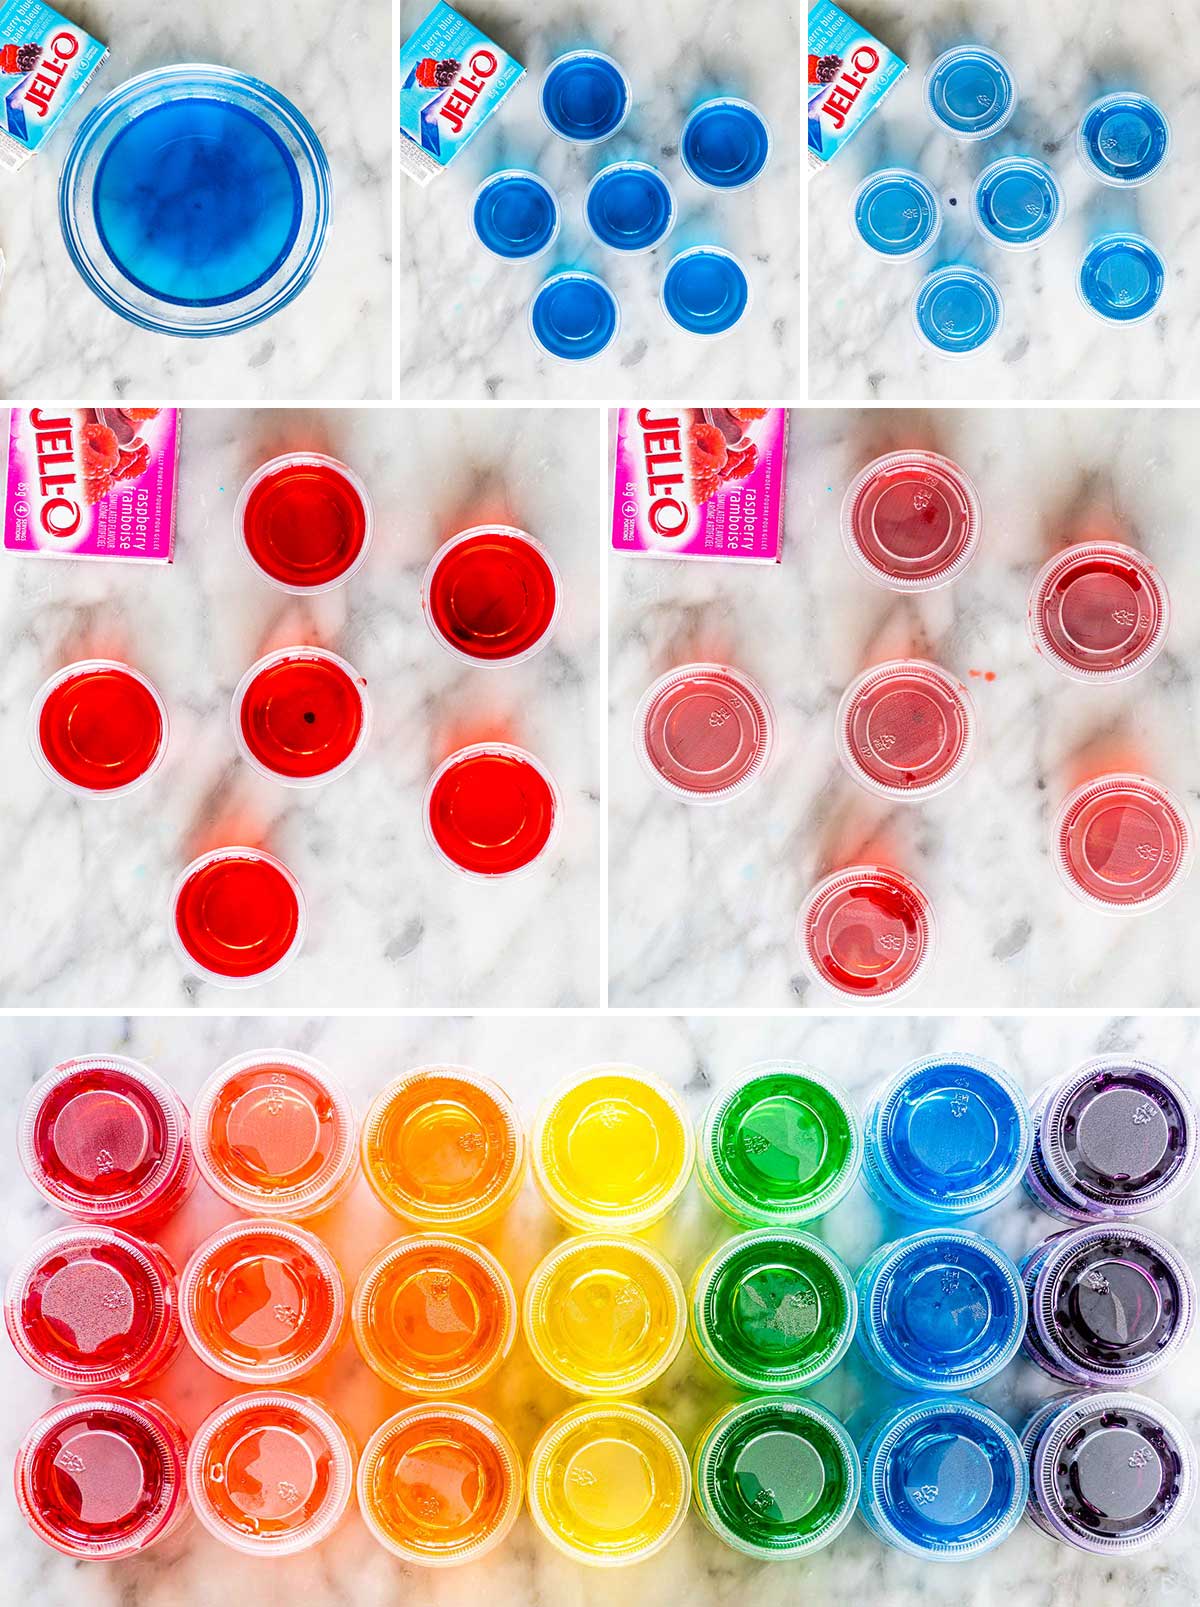 detailed process shots showing how to make jello shots